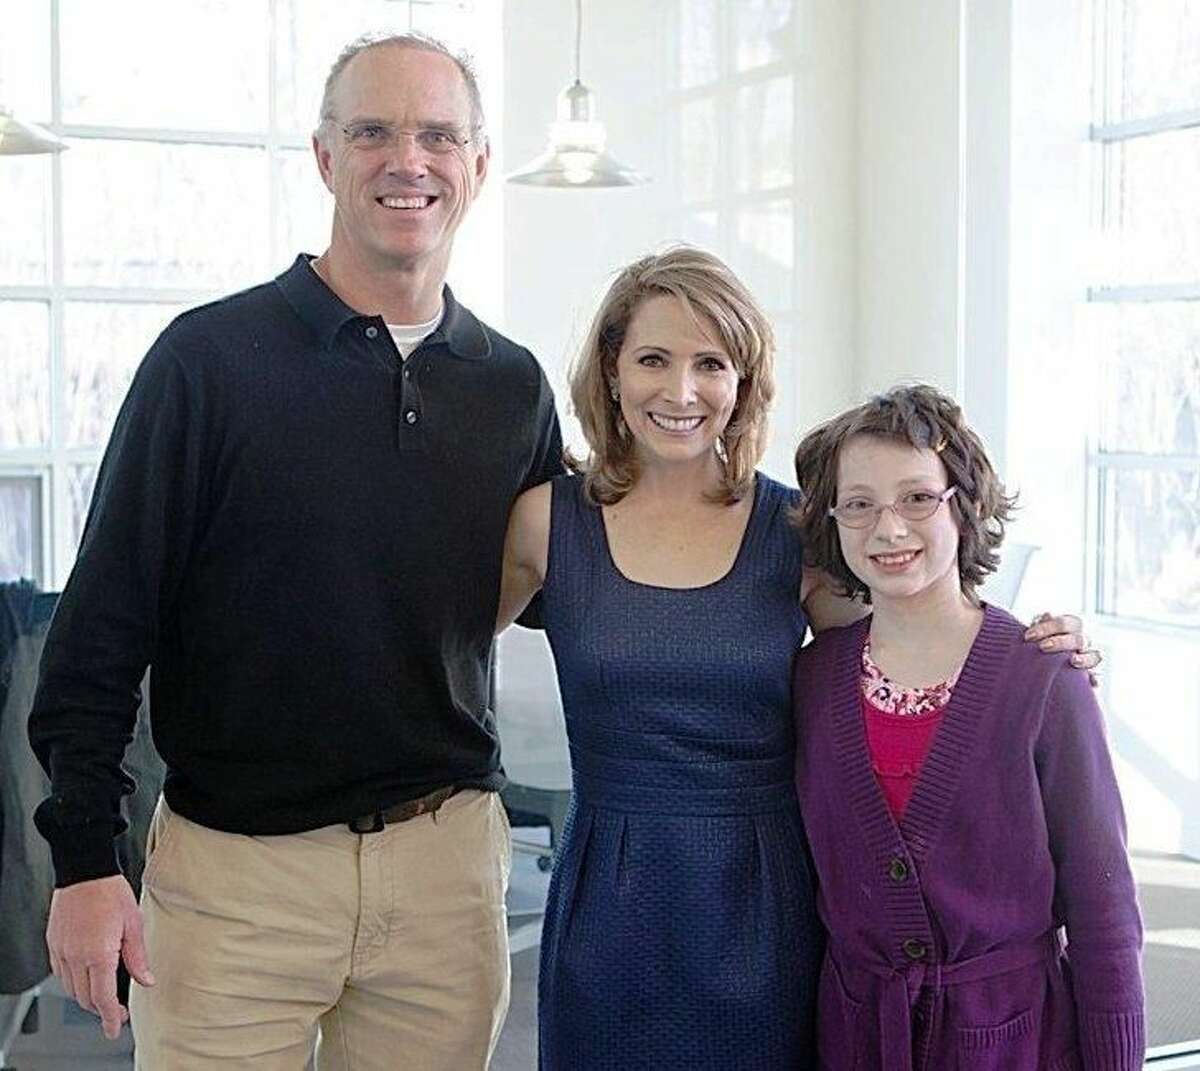 Photo credit: Sarah Lehberger (From left) Jeff Keith, CT Challenge co-founder and president, poses with Maya Oberstein and Shannon Miller.